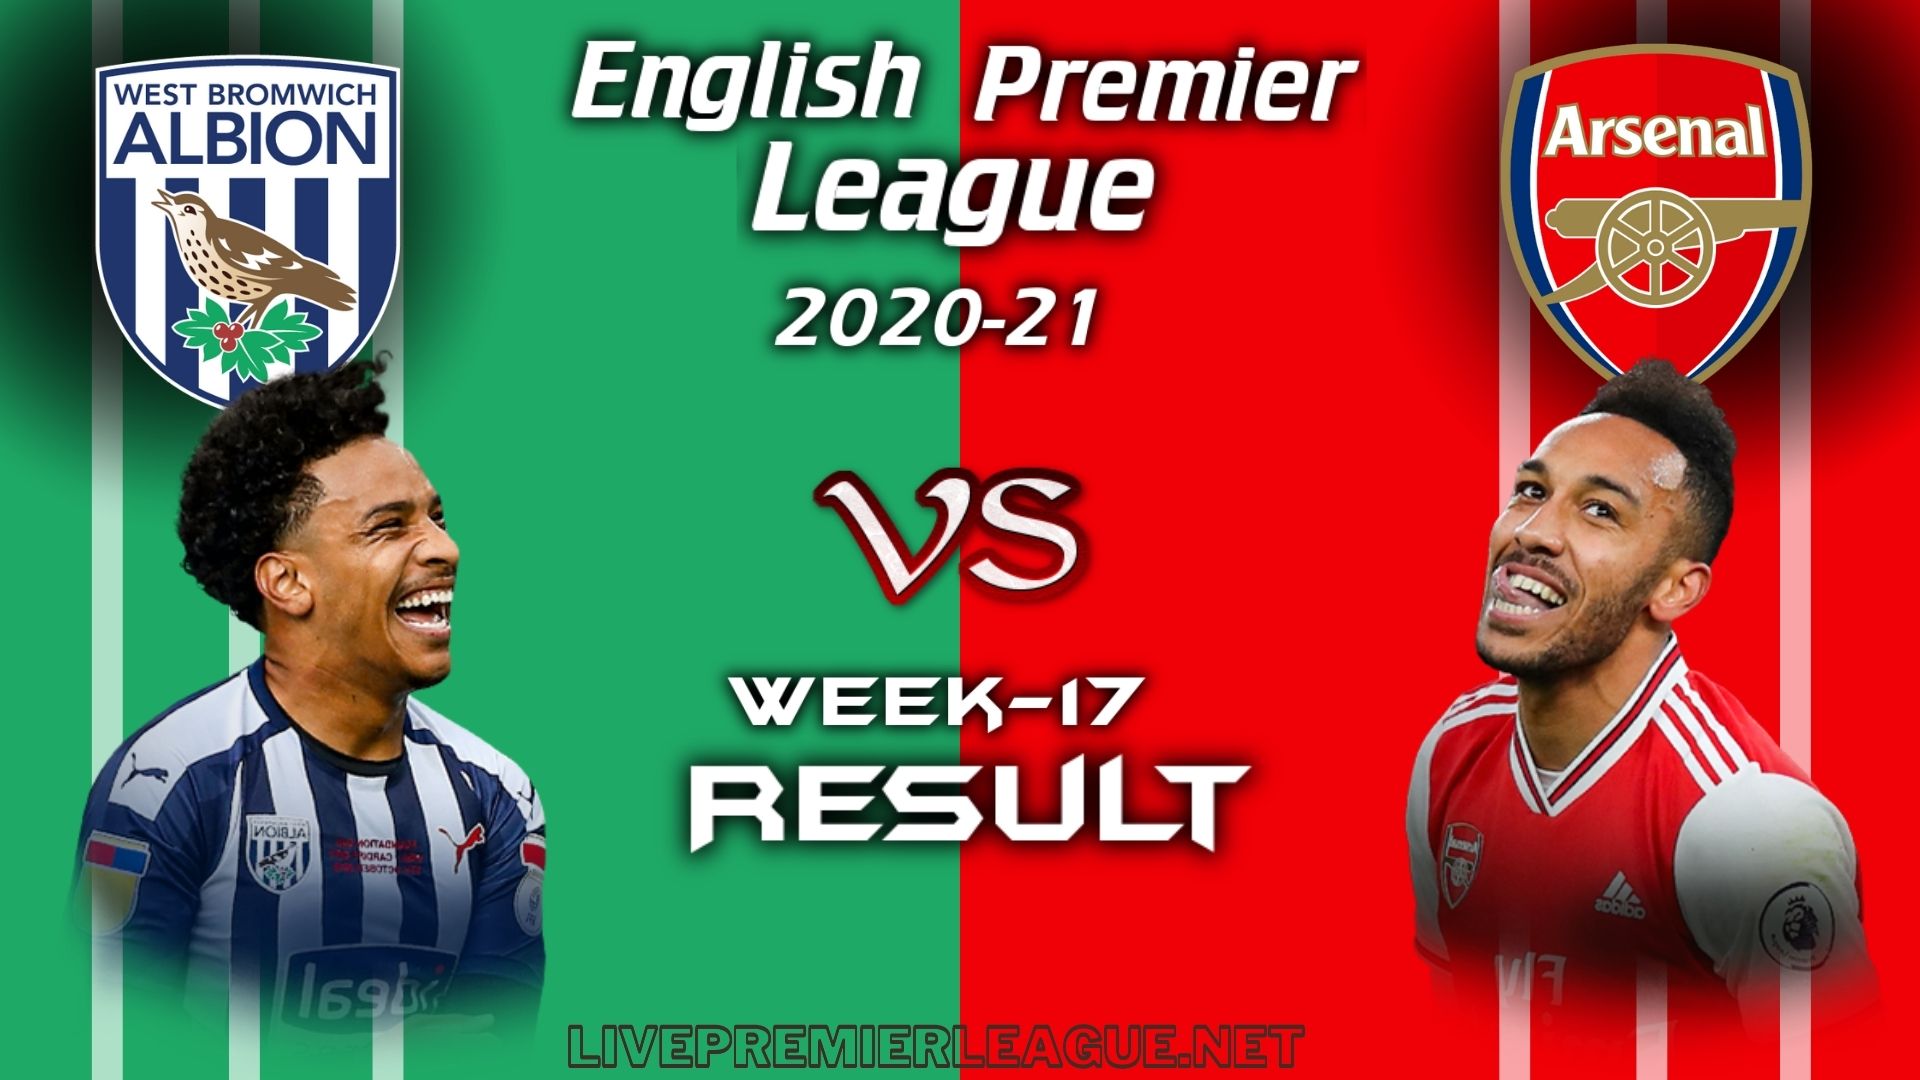 West Bromwich Albion Vs Arsenal | EPL Week 17 Result 2021